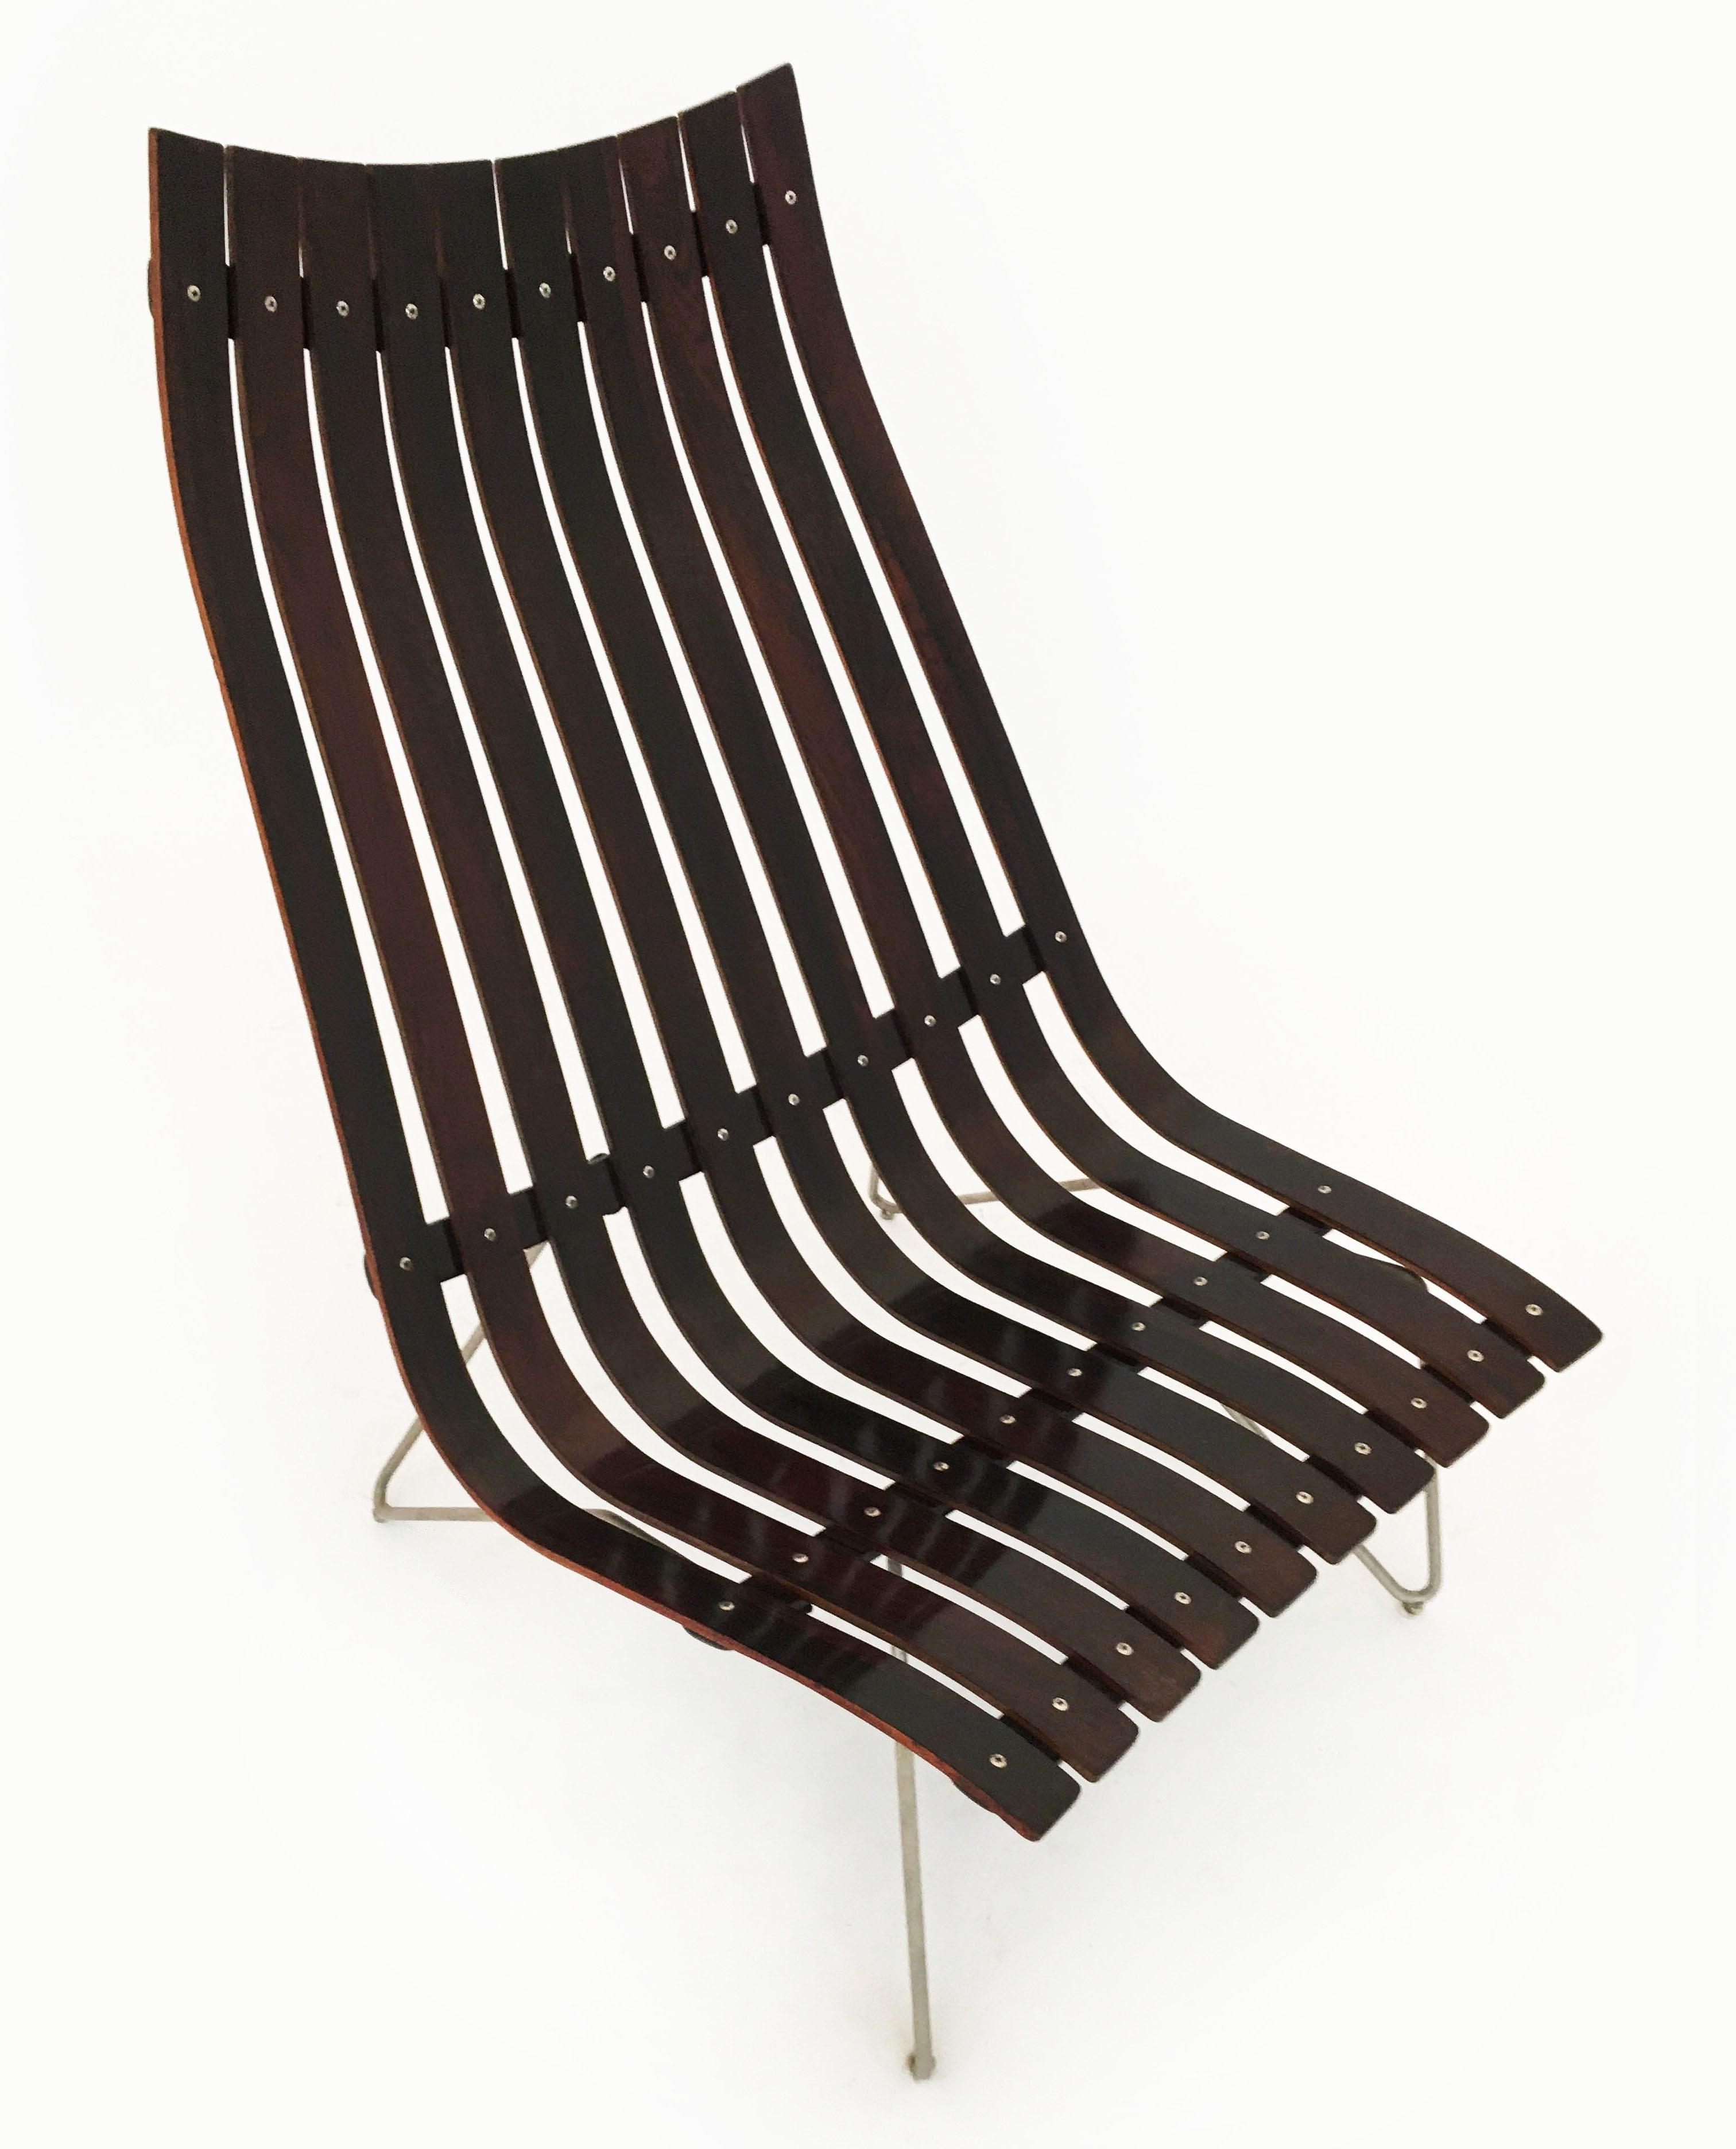 Hans Brattrud Lounge Chair Model 'Scandia' by Hove Mobler, Norway 1950s In Good Condition For Sale In Vienna, AT